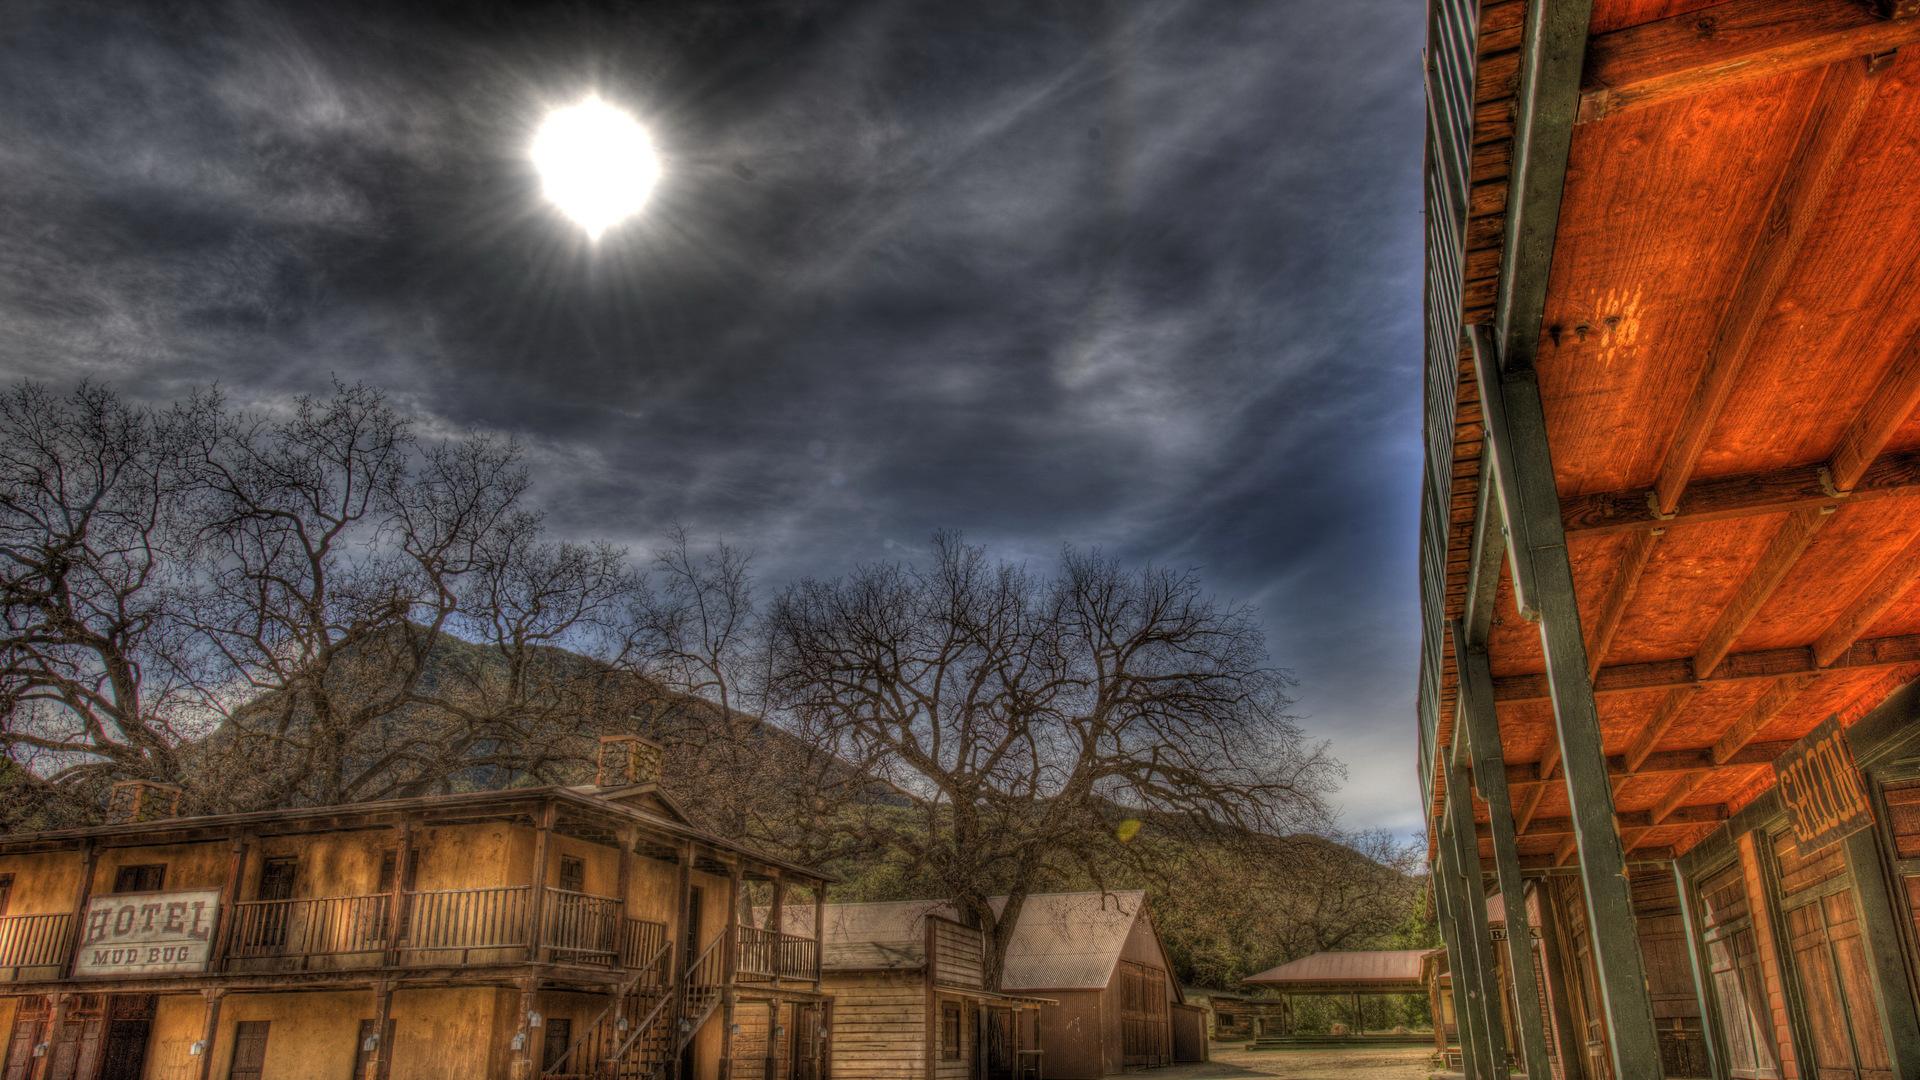 Old west town in midday hdr - (#110176) - High Quality and ...